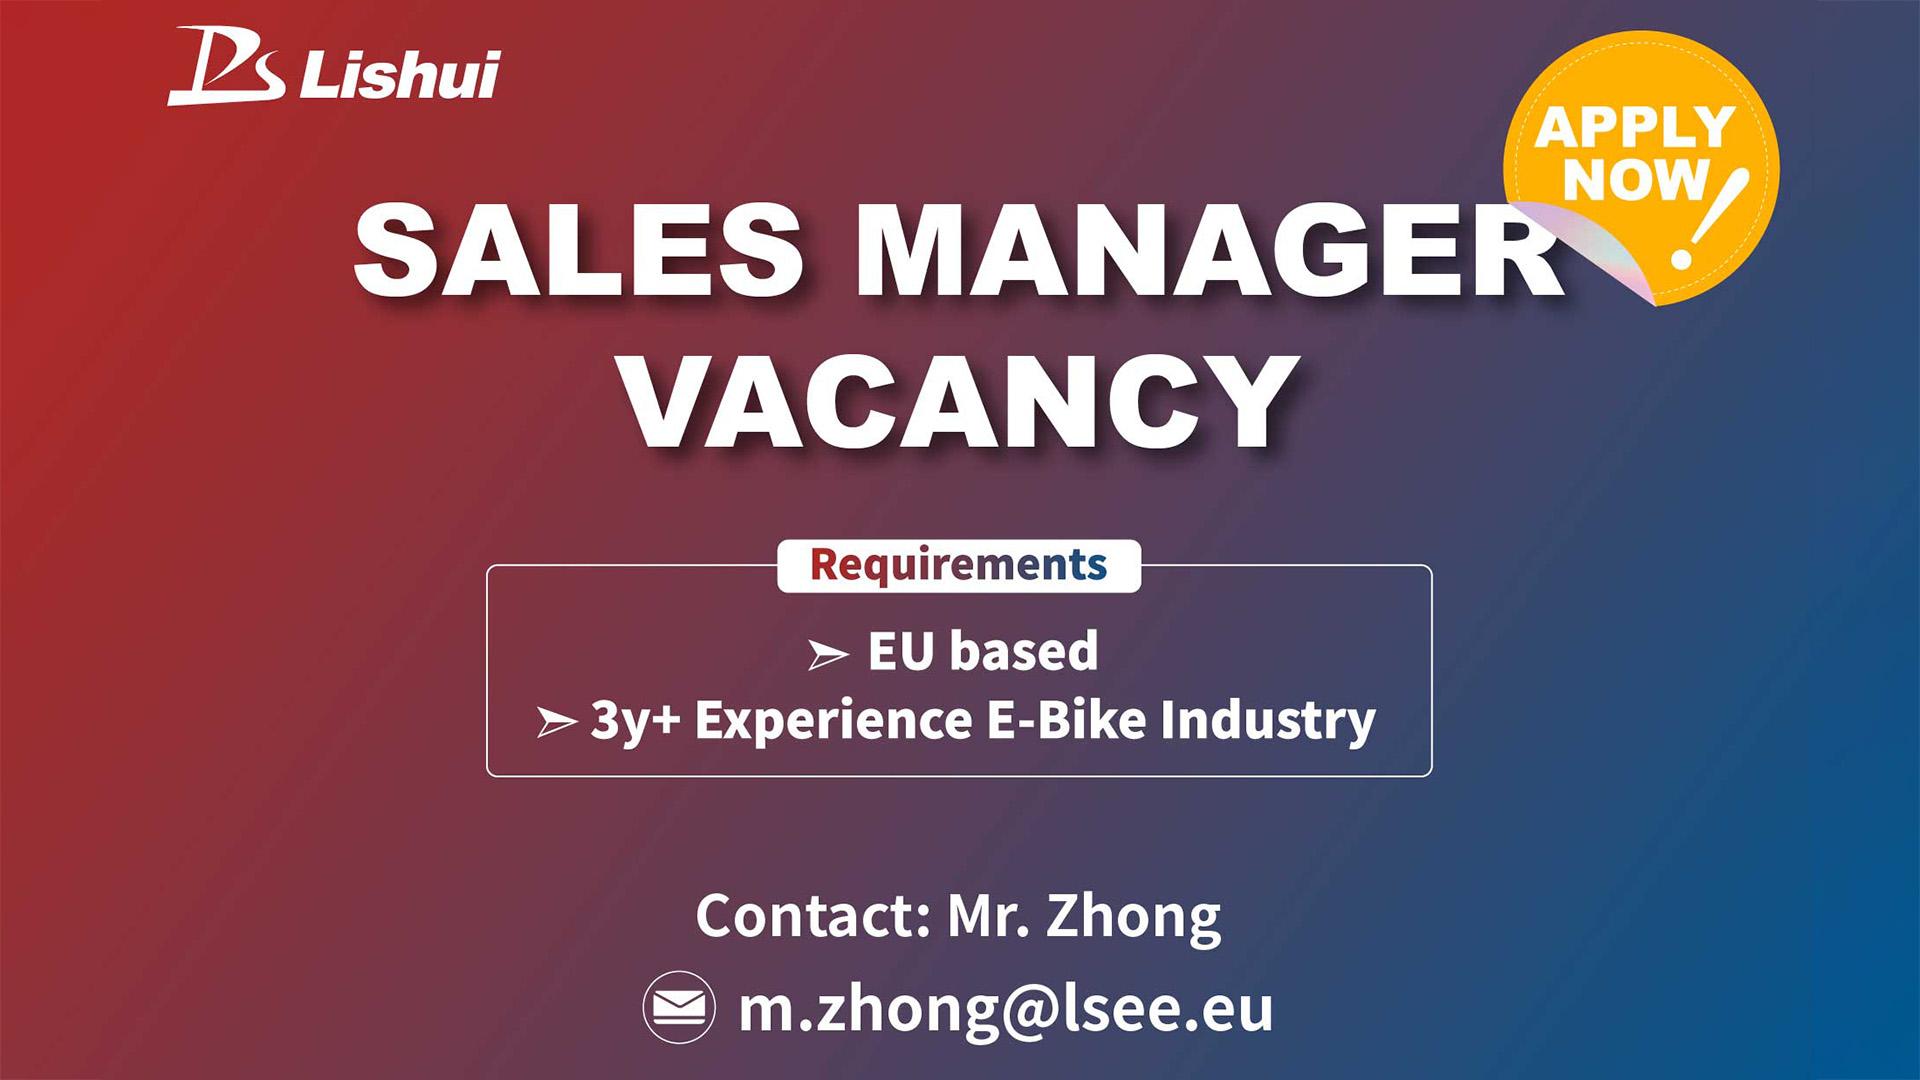 Lishui Sales Manager Vacancy